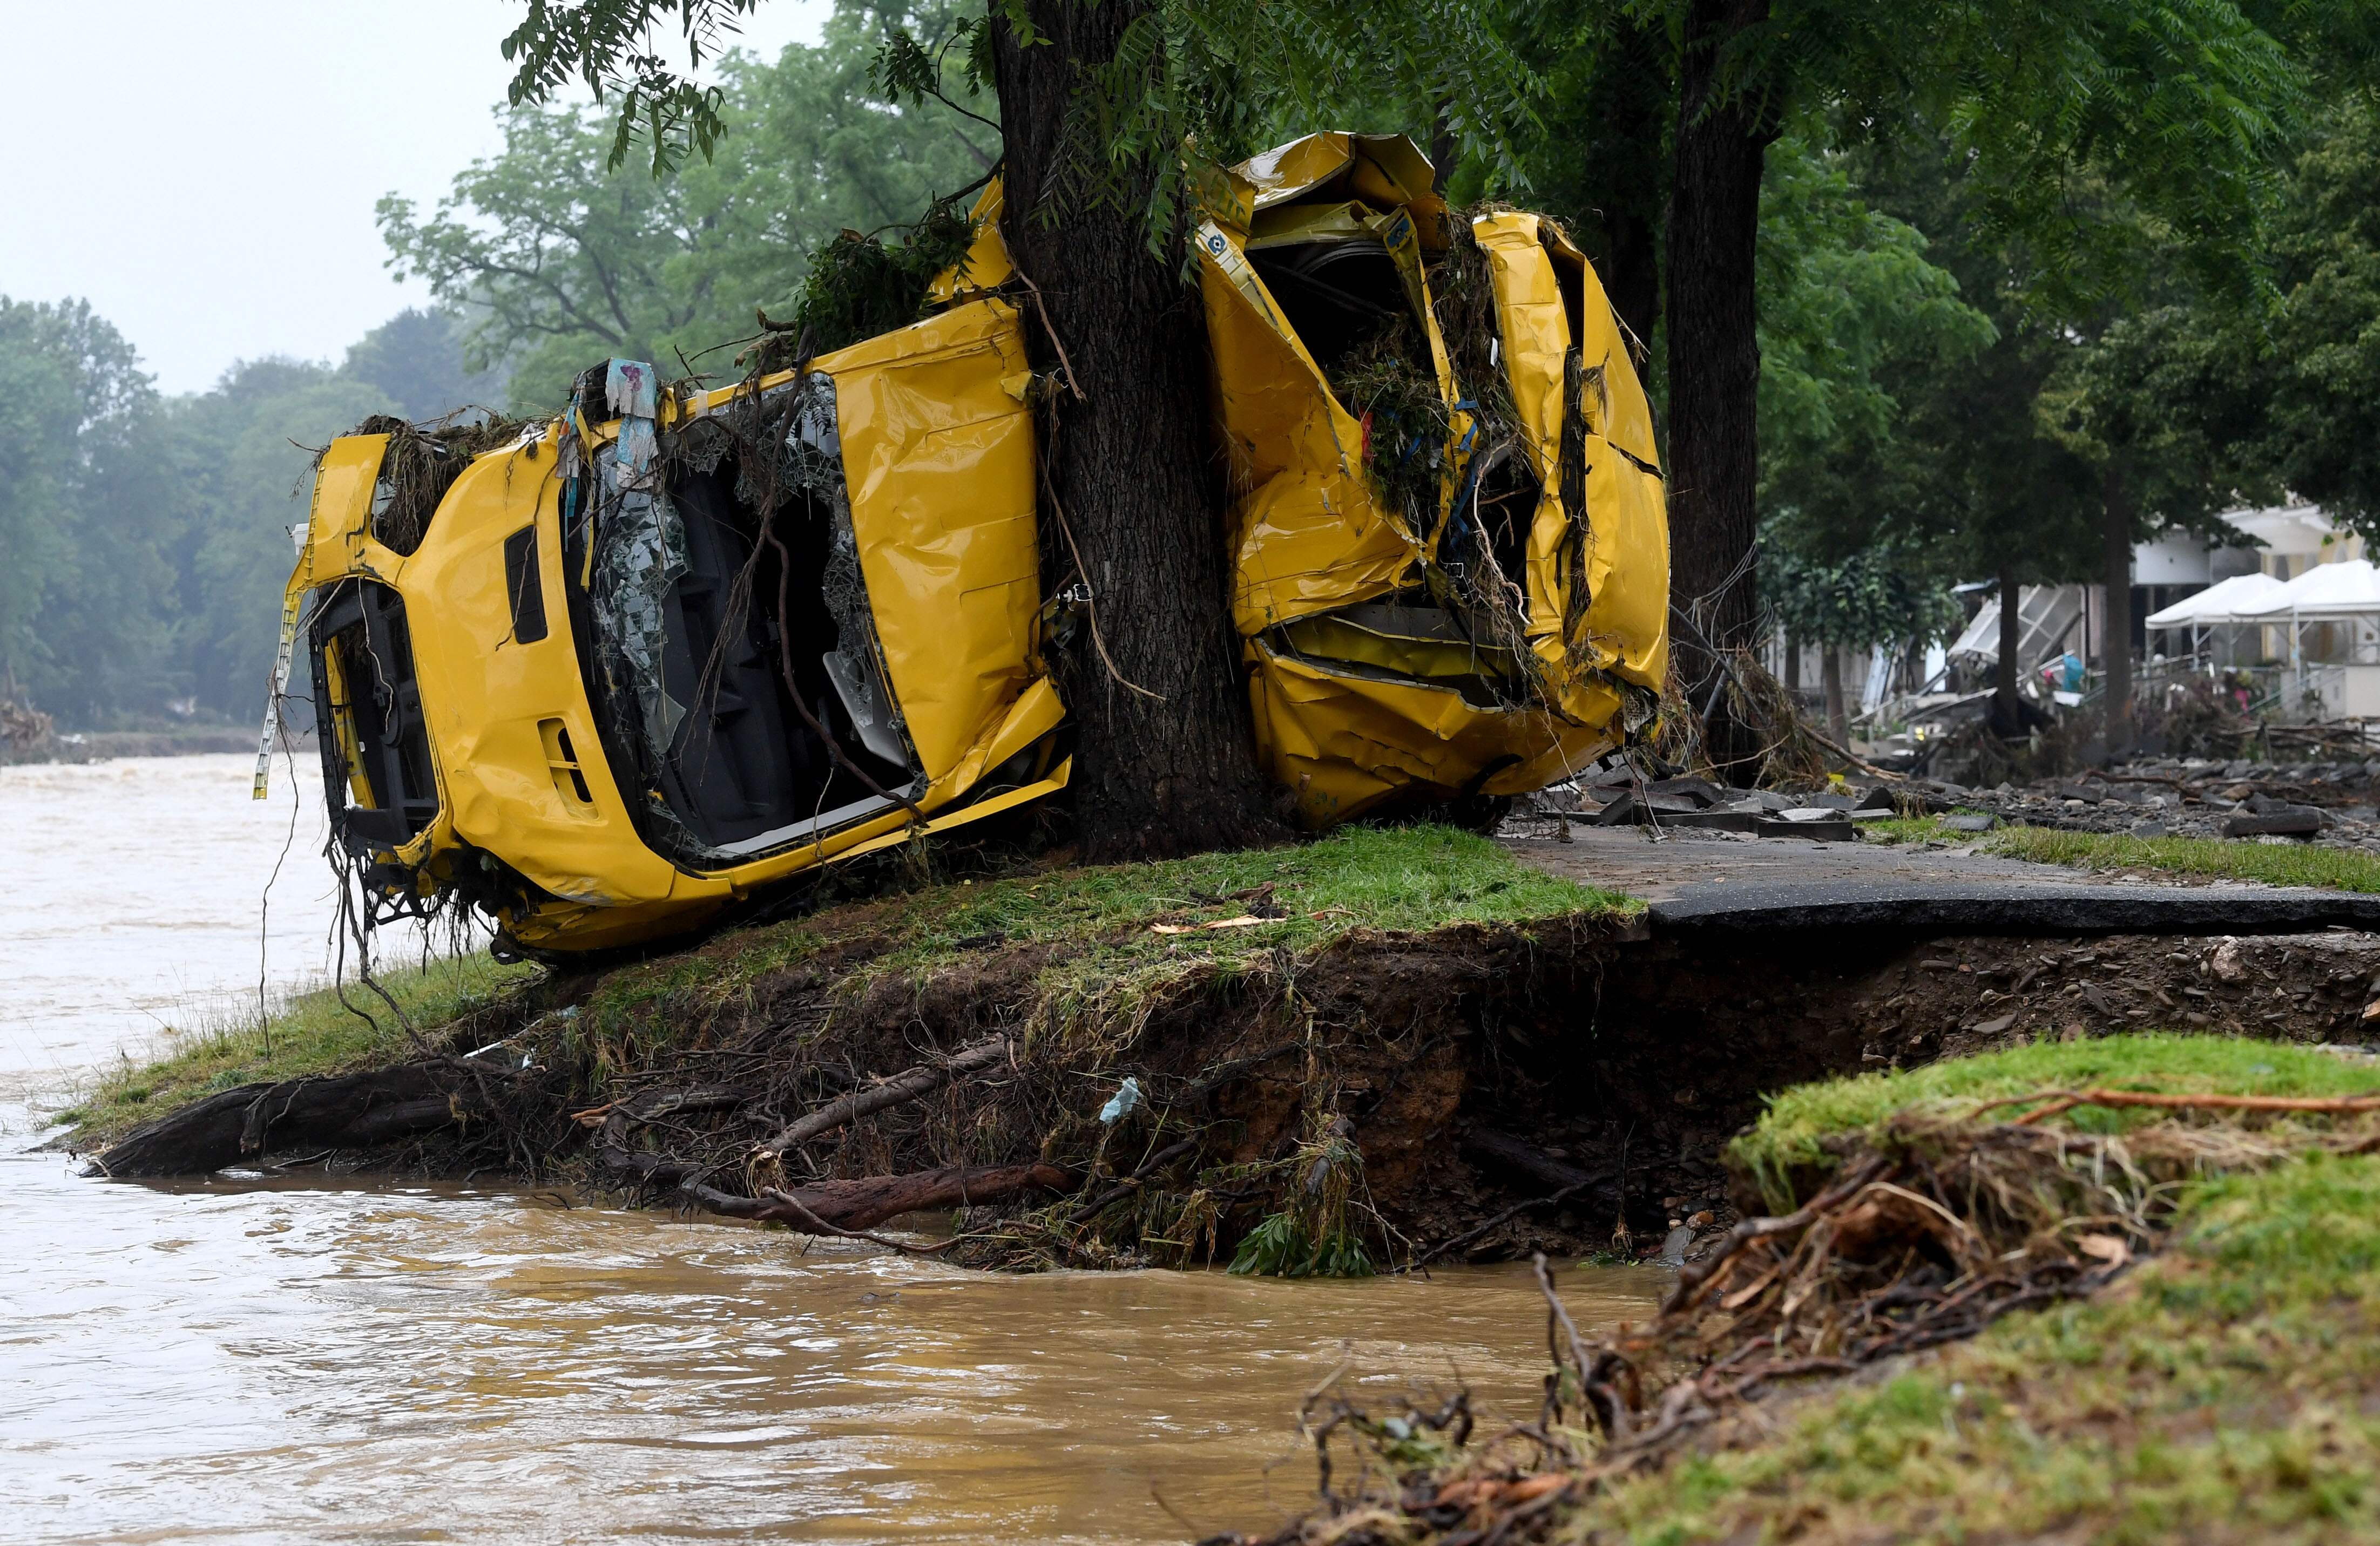 A van crushed by the torrents is wedged against a tree after the floods wreaked havoc in Bad Neuenahr-Ahrweiler, western Germany